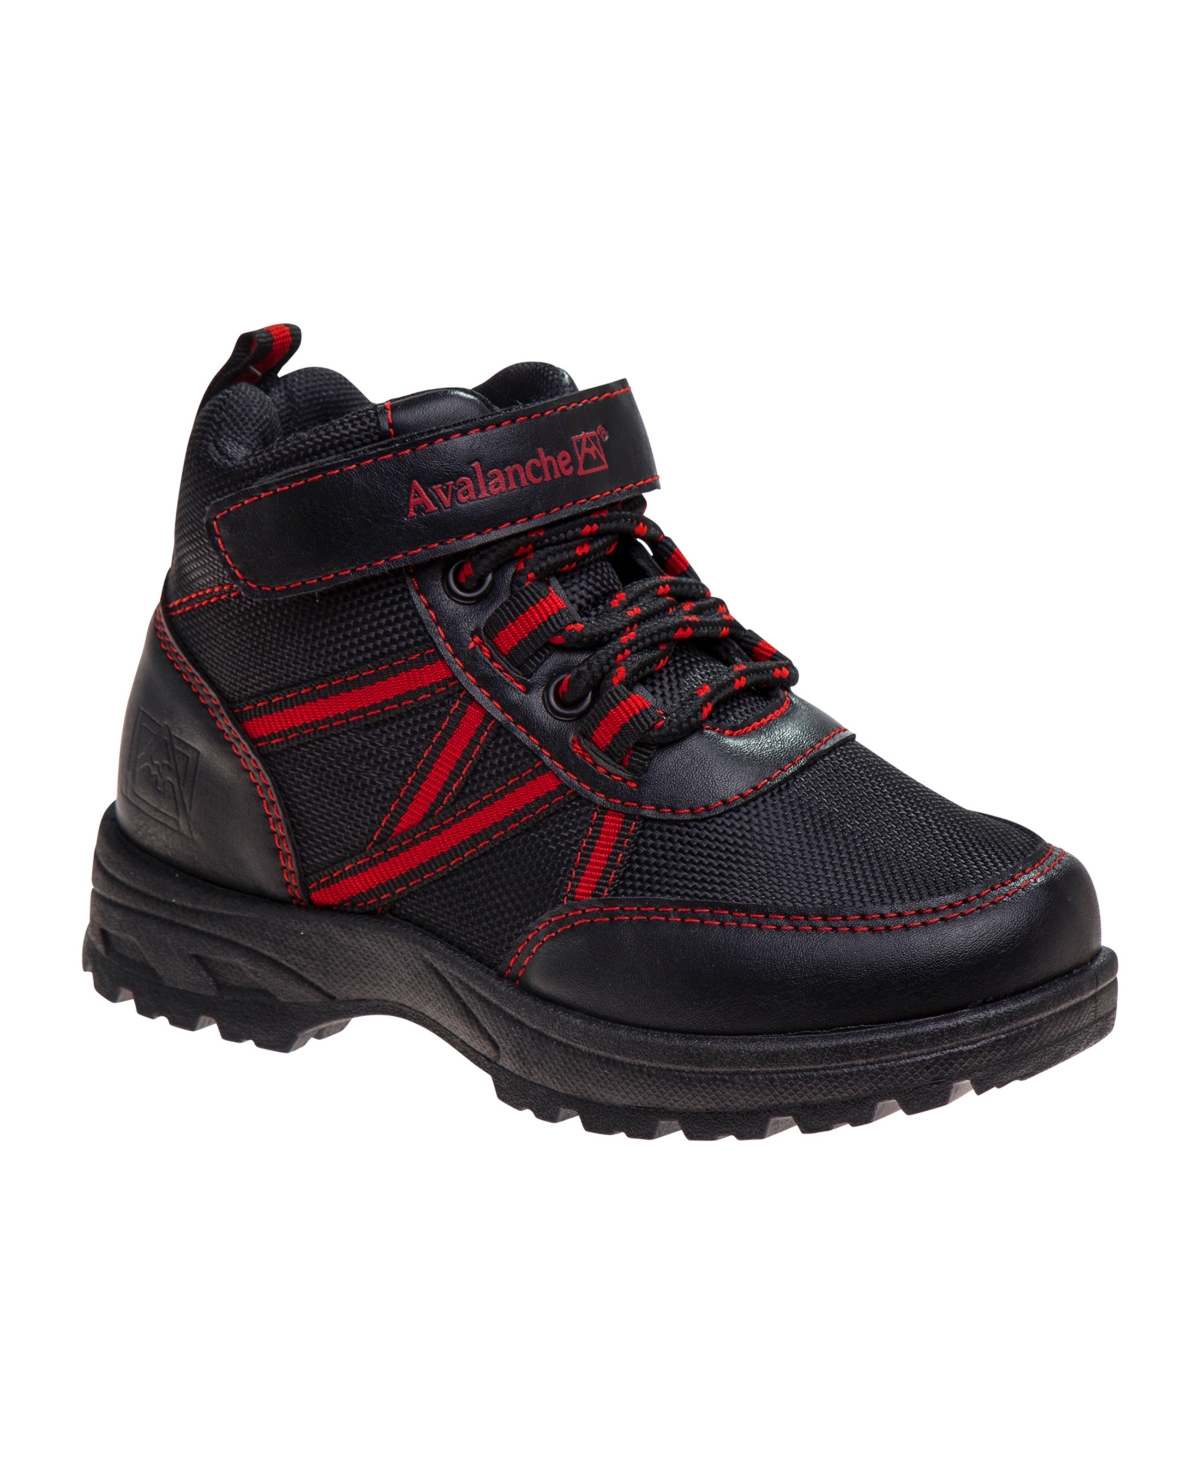 Avalanche Kids' Little Boys Hiker Boots In Black,red